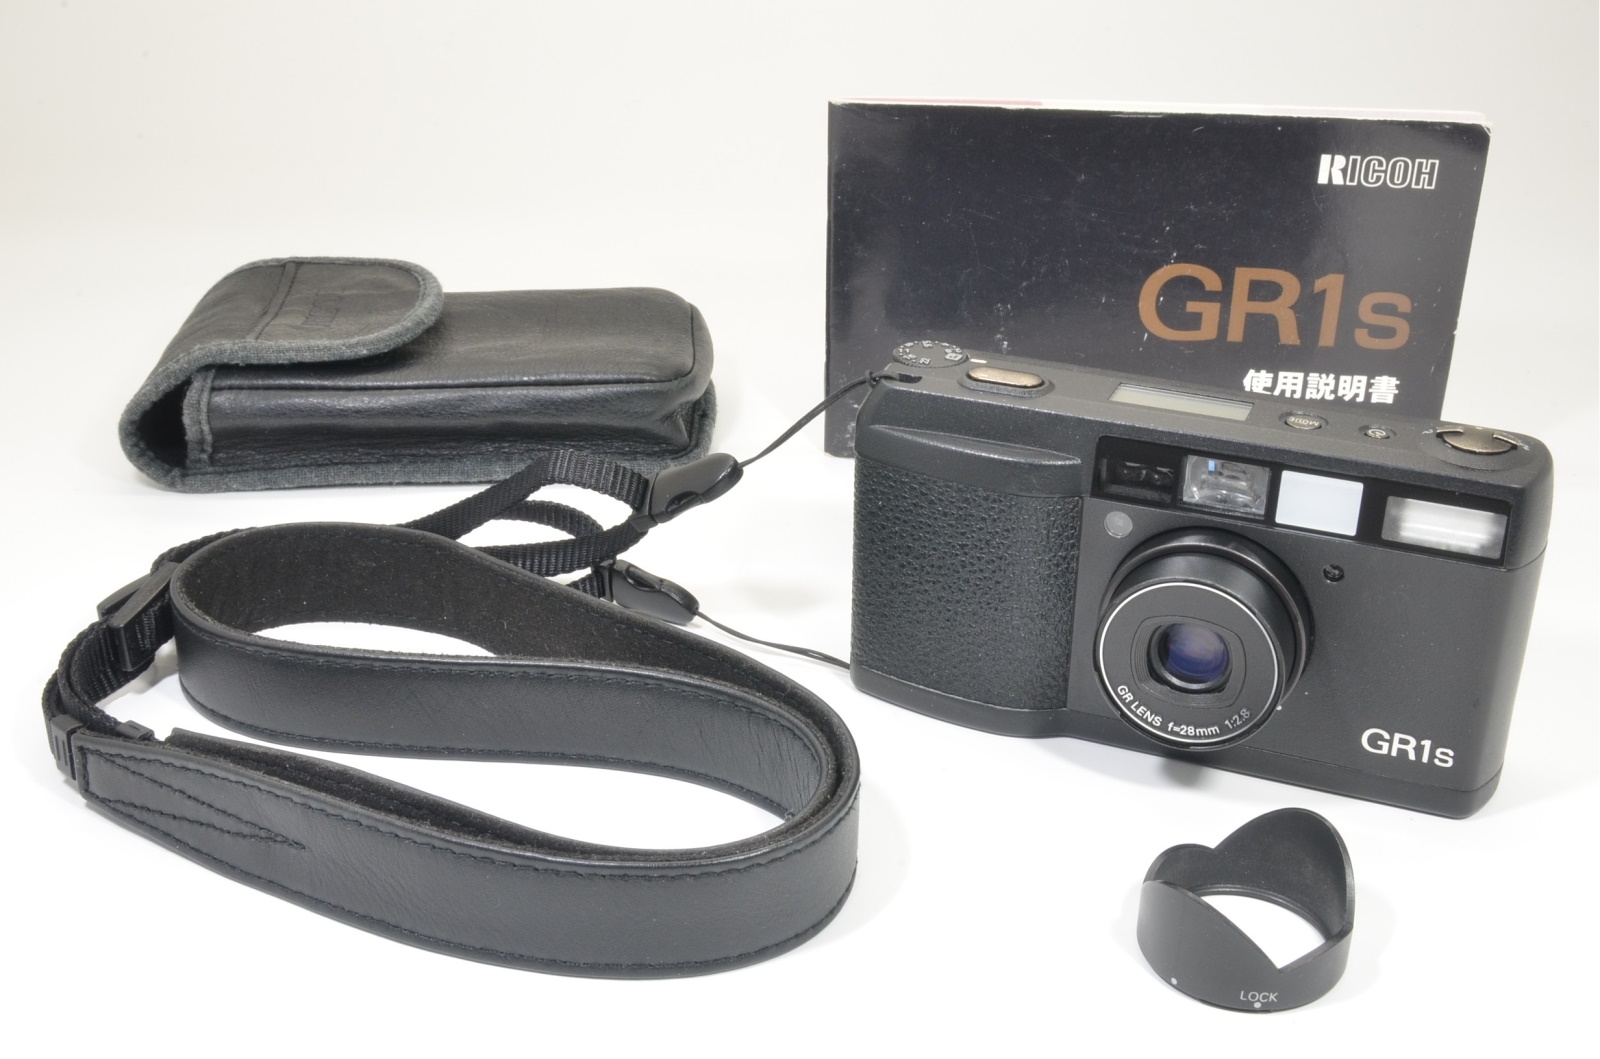 ricoh gr1s black 28mm f2.8 film camera from japan lcd works film tested